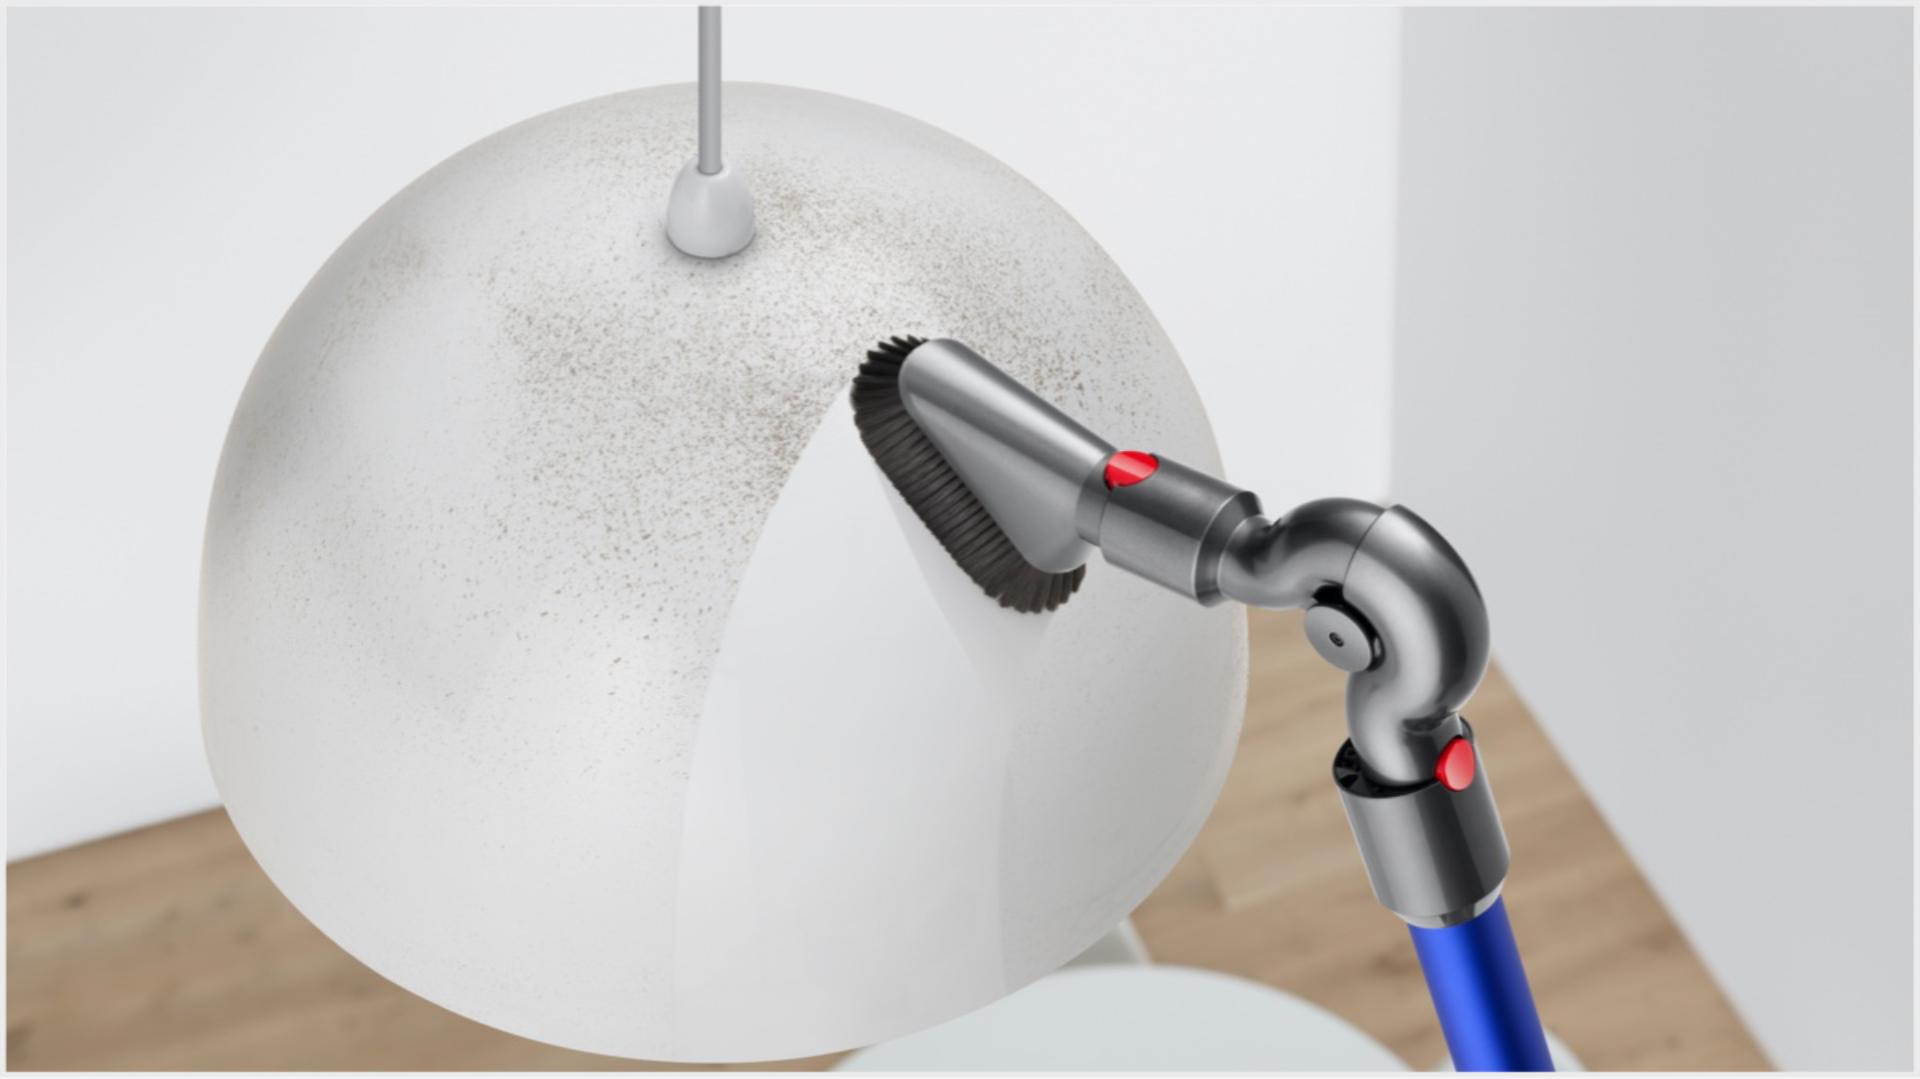 Dyson tool allowing the vacuum to clean a lampshade.